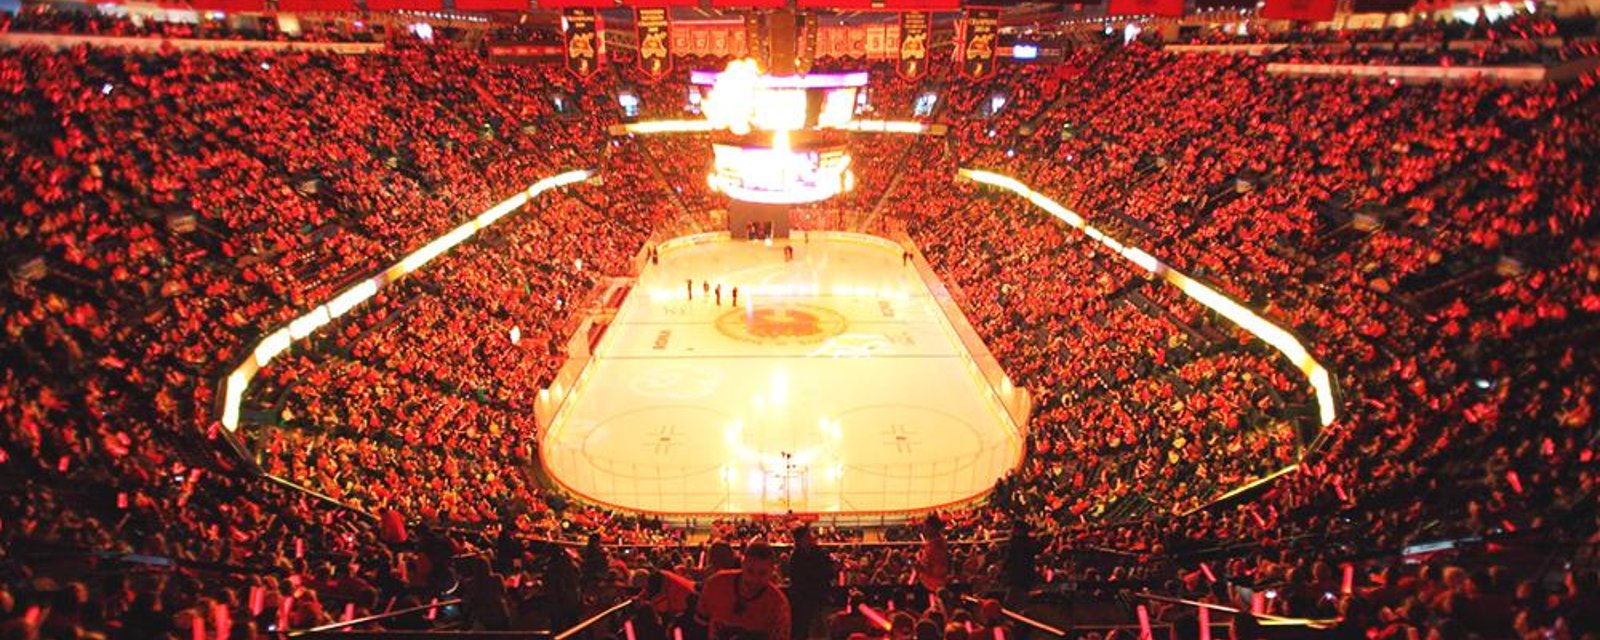 Breaking: “There is no point” to continue for the Flames